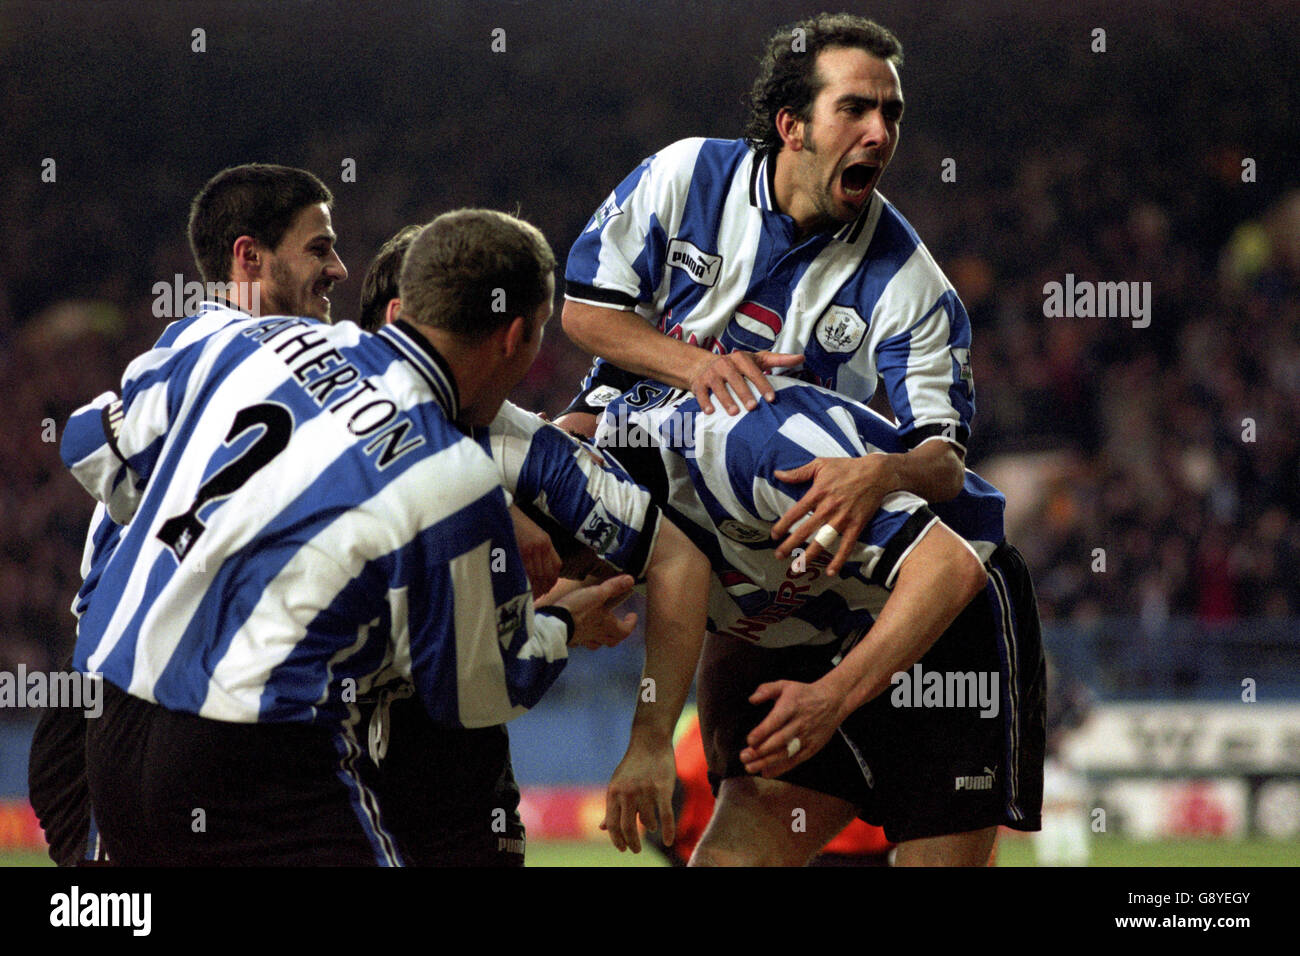 PAOLO DI CANIO SHEFFIELD WEDNESDAY FC 01 September 1997 Stock Photo - Alamy